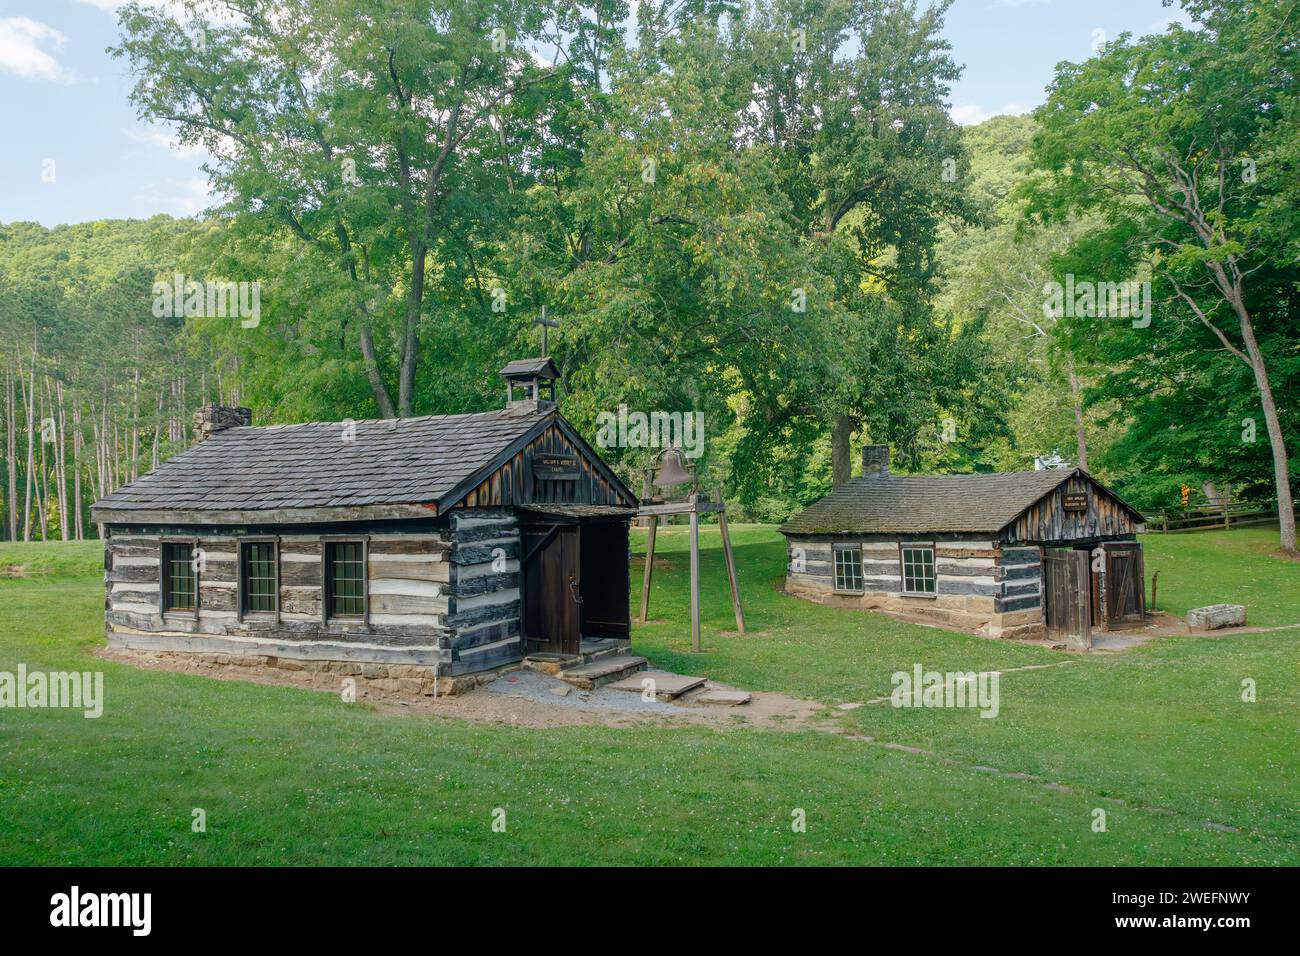 William H Vodrey III Chapel and Theo Appleby Blacksmith Shop. Gaston's Mill and Pioneer Village at Beaver Creek State Park, East Liverpool, Ohio, USA. Stock Photo